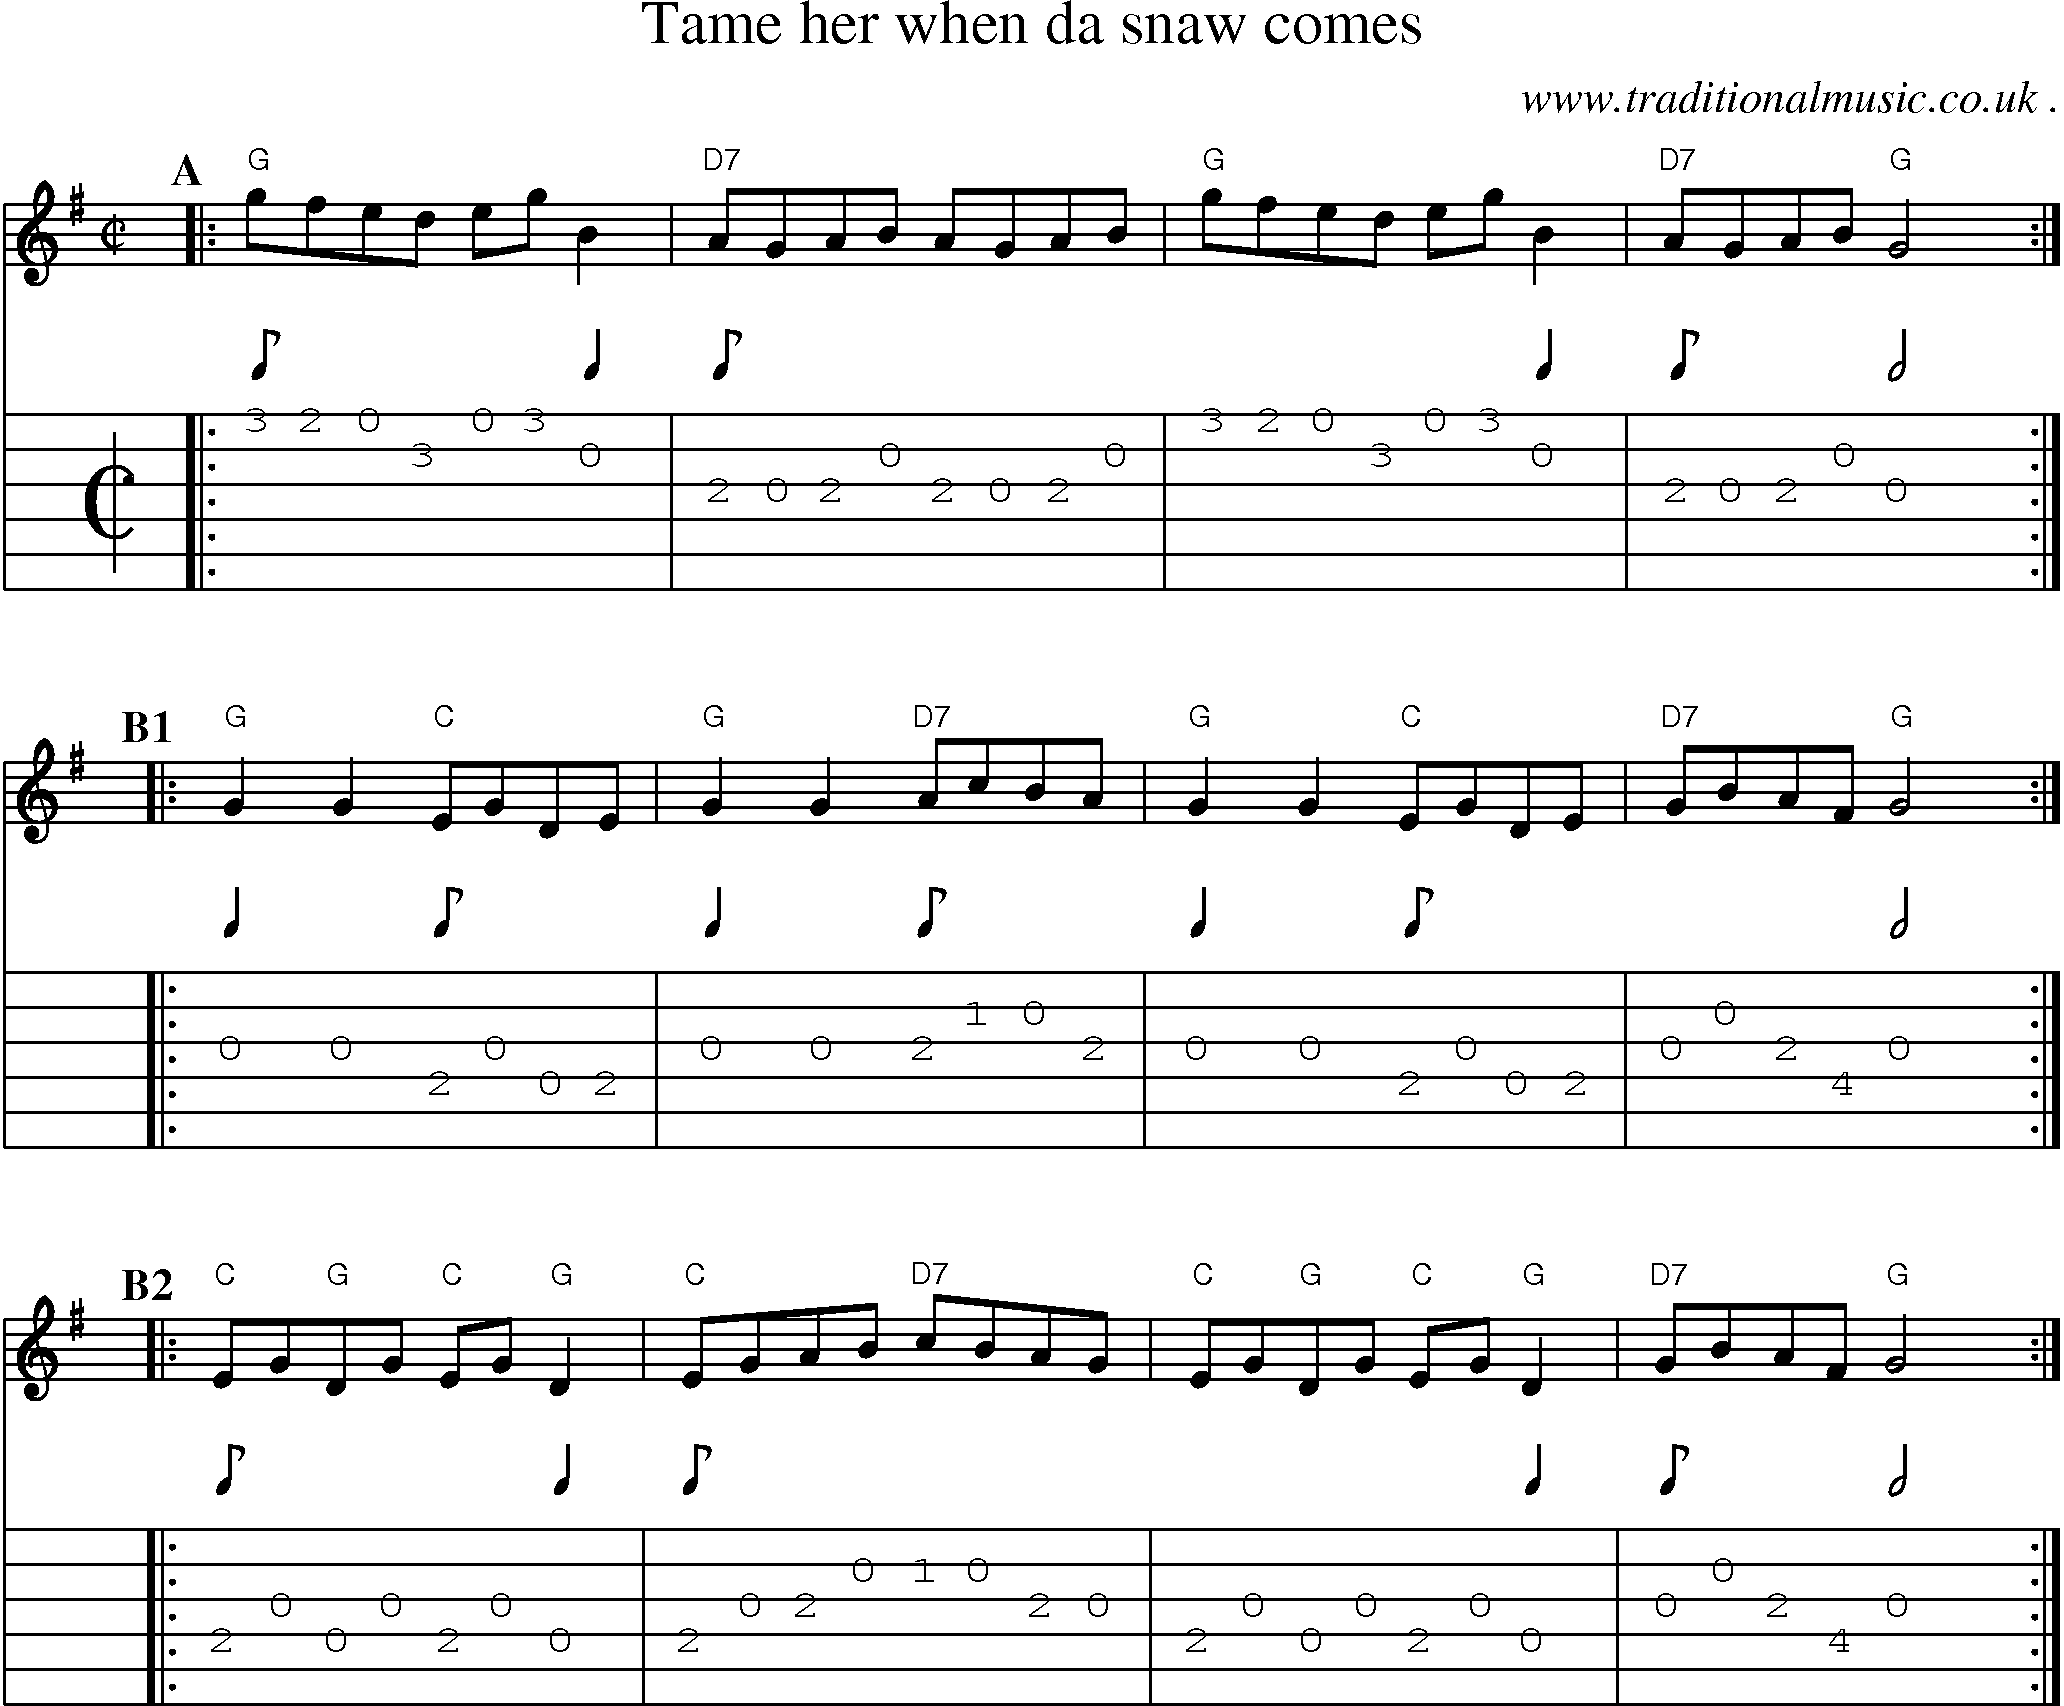 Sheet-music  score, Chords and Guitar Tabs for Tame Her When Da Snaw Comes